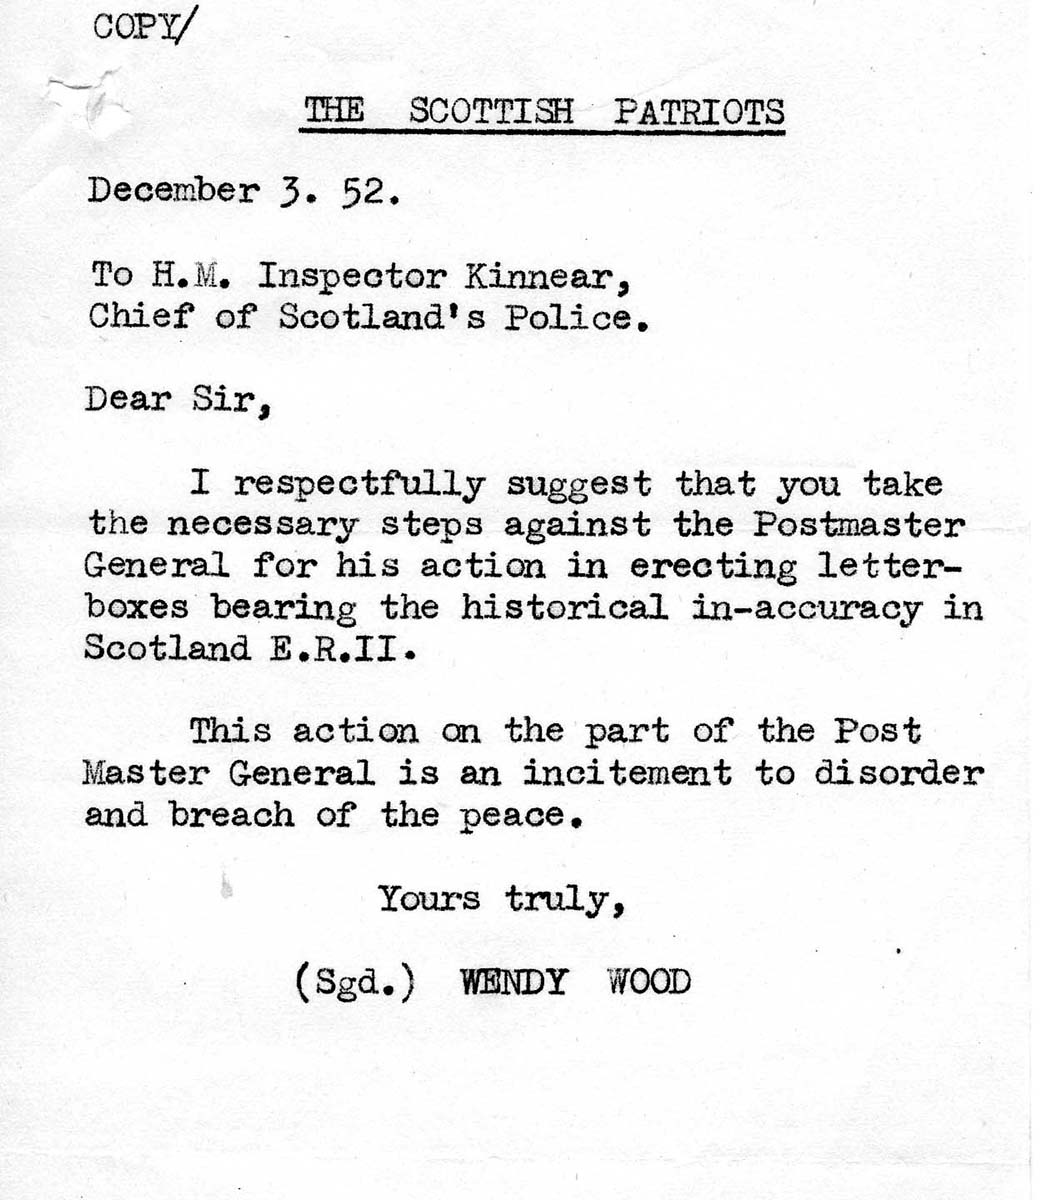 A scan of a typewritten letter. It says: 